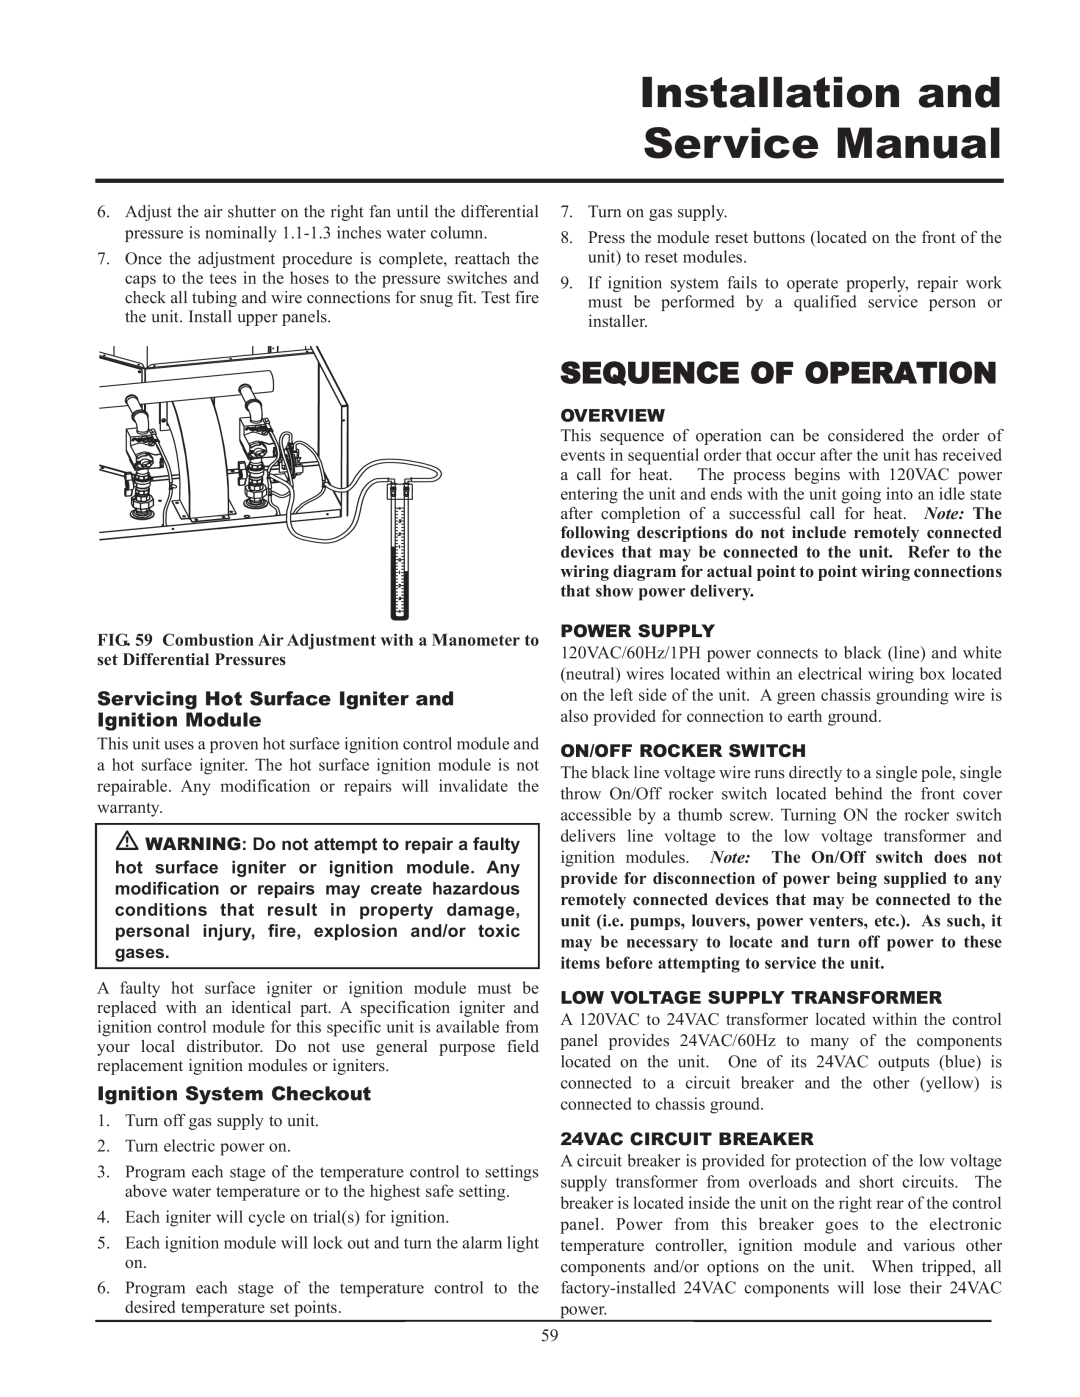 Lochinvar 399 Sequence Of Operation, Servicing Hot Surface Igniter and Ignition Module, Ignition System Checkout, Overview 